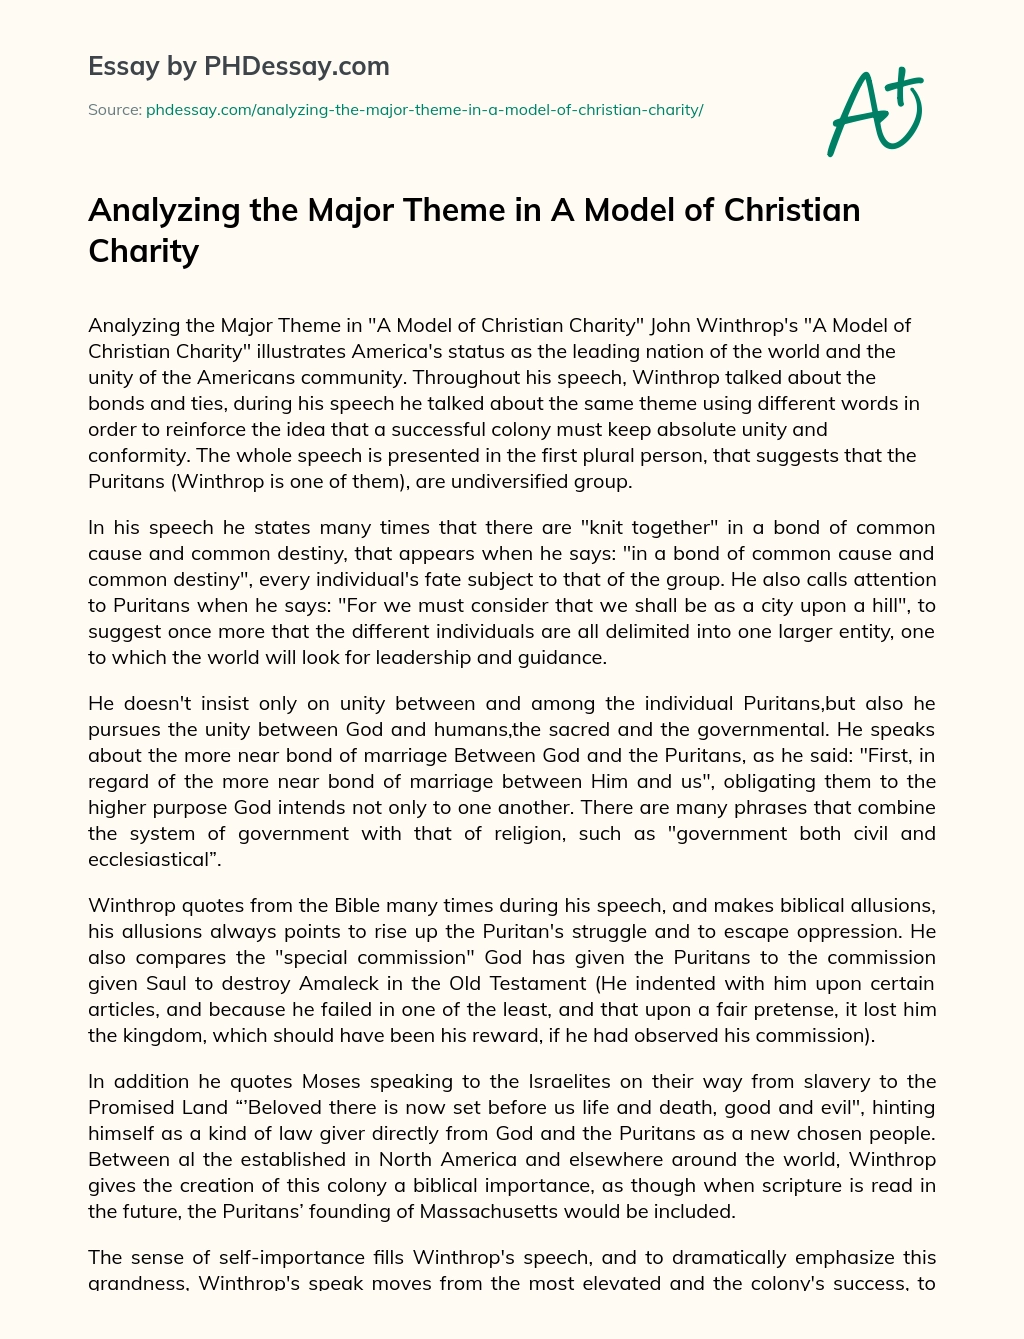 Analyzing the Major Theme in A Model of Christian Charity essay